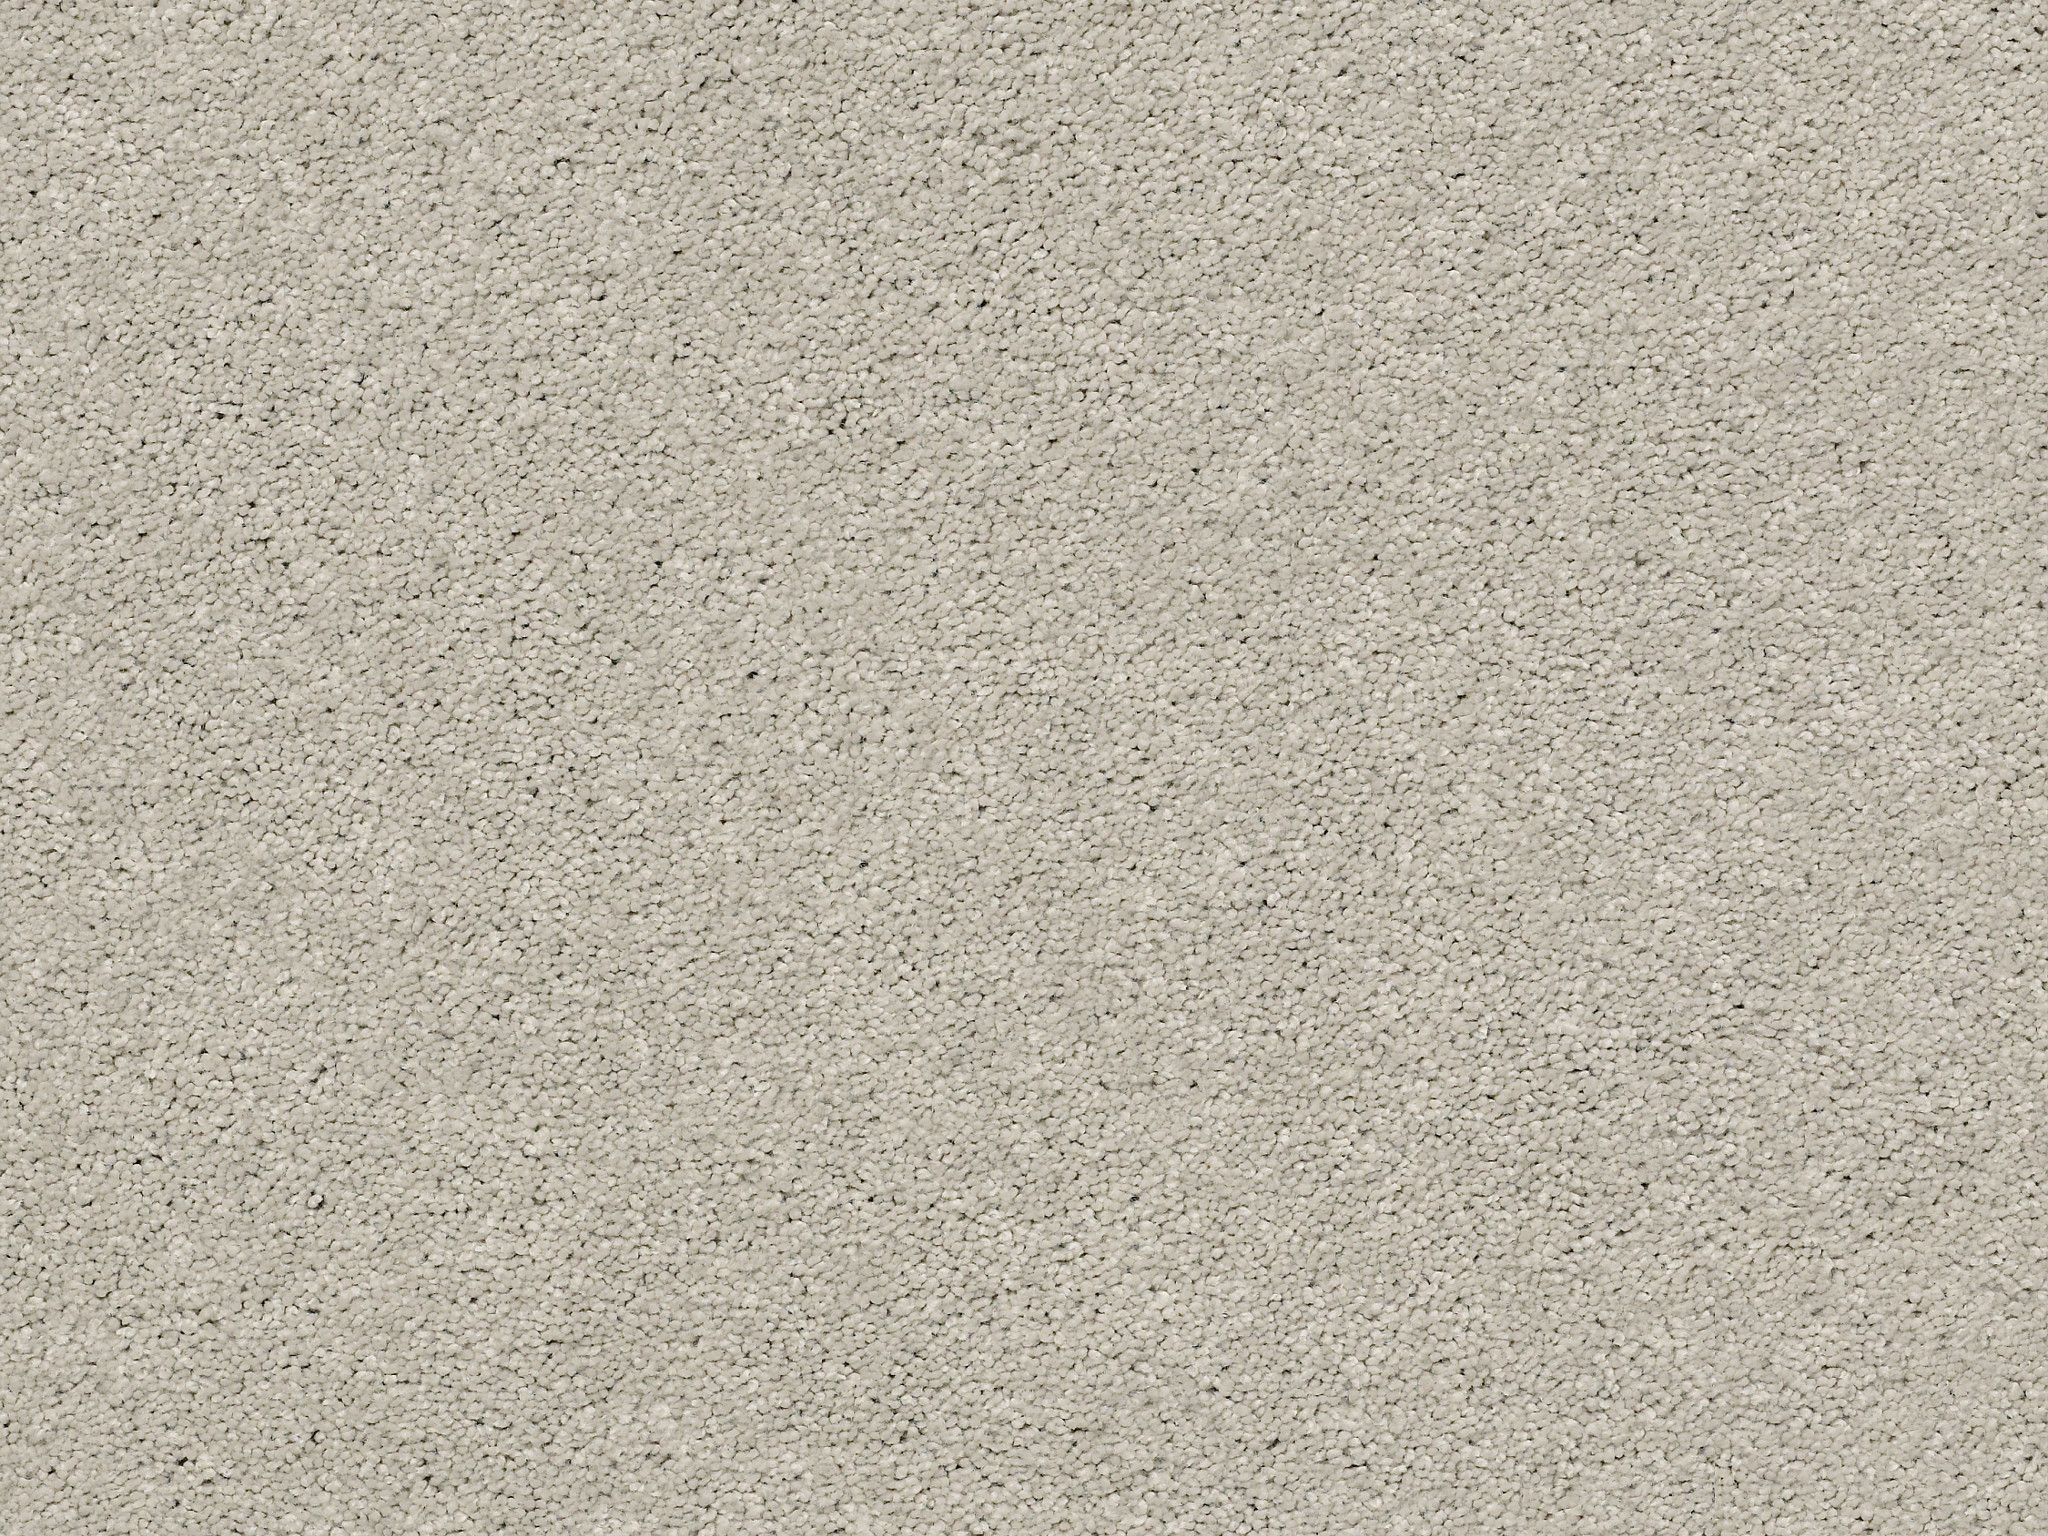 First Act Carpet - Gentle Gray Zoomed Swatch Image